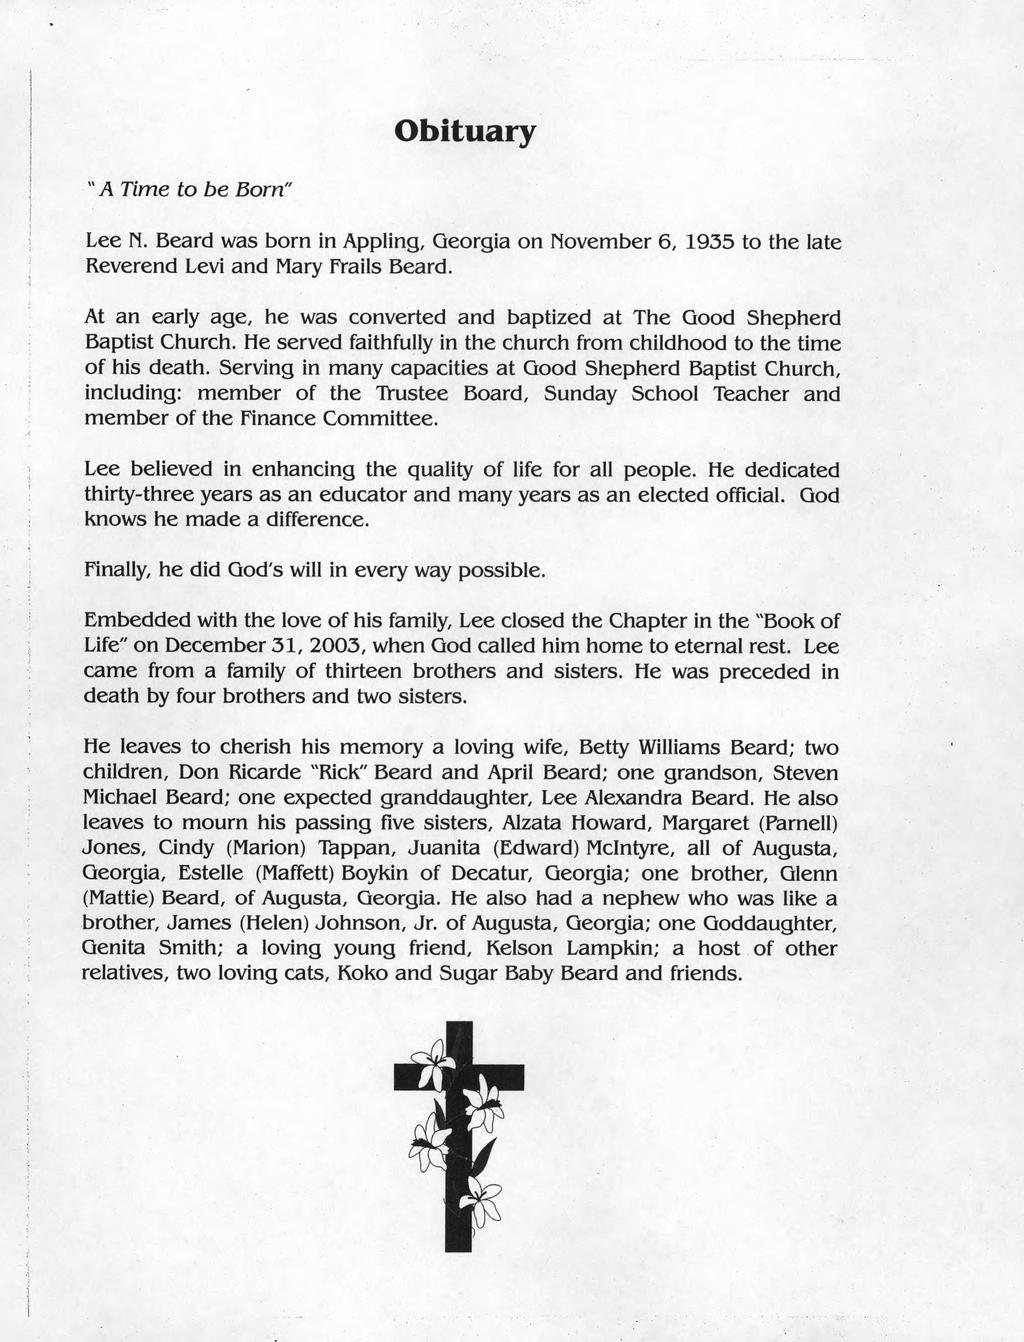 Obituary " A Time to be Born" Lee N. Beard was born in Appling, Georgia on November 6, 1935 to the late Reverend Levi and Mary Frails Beard.